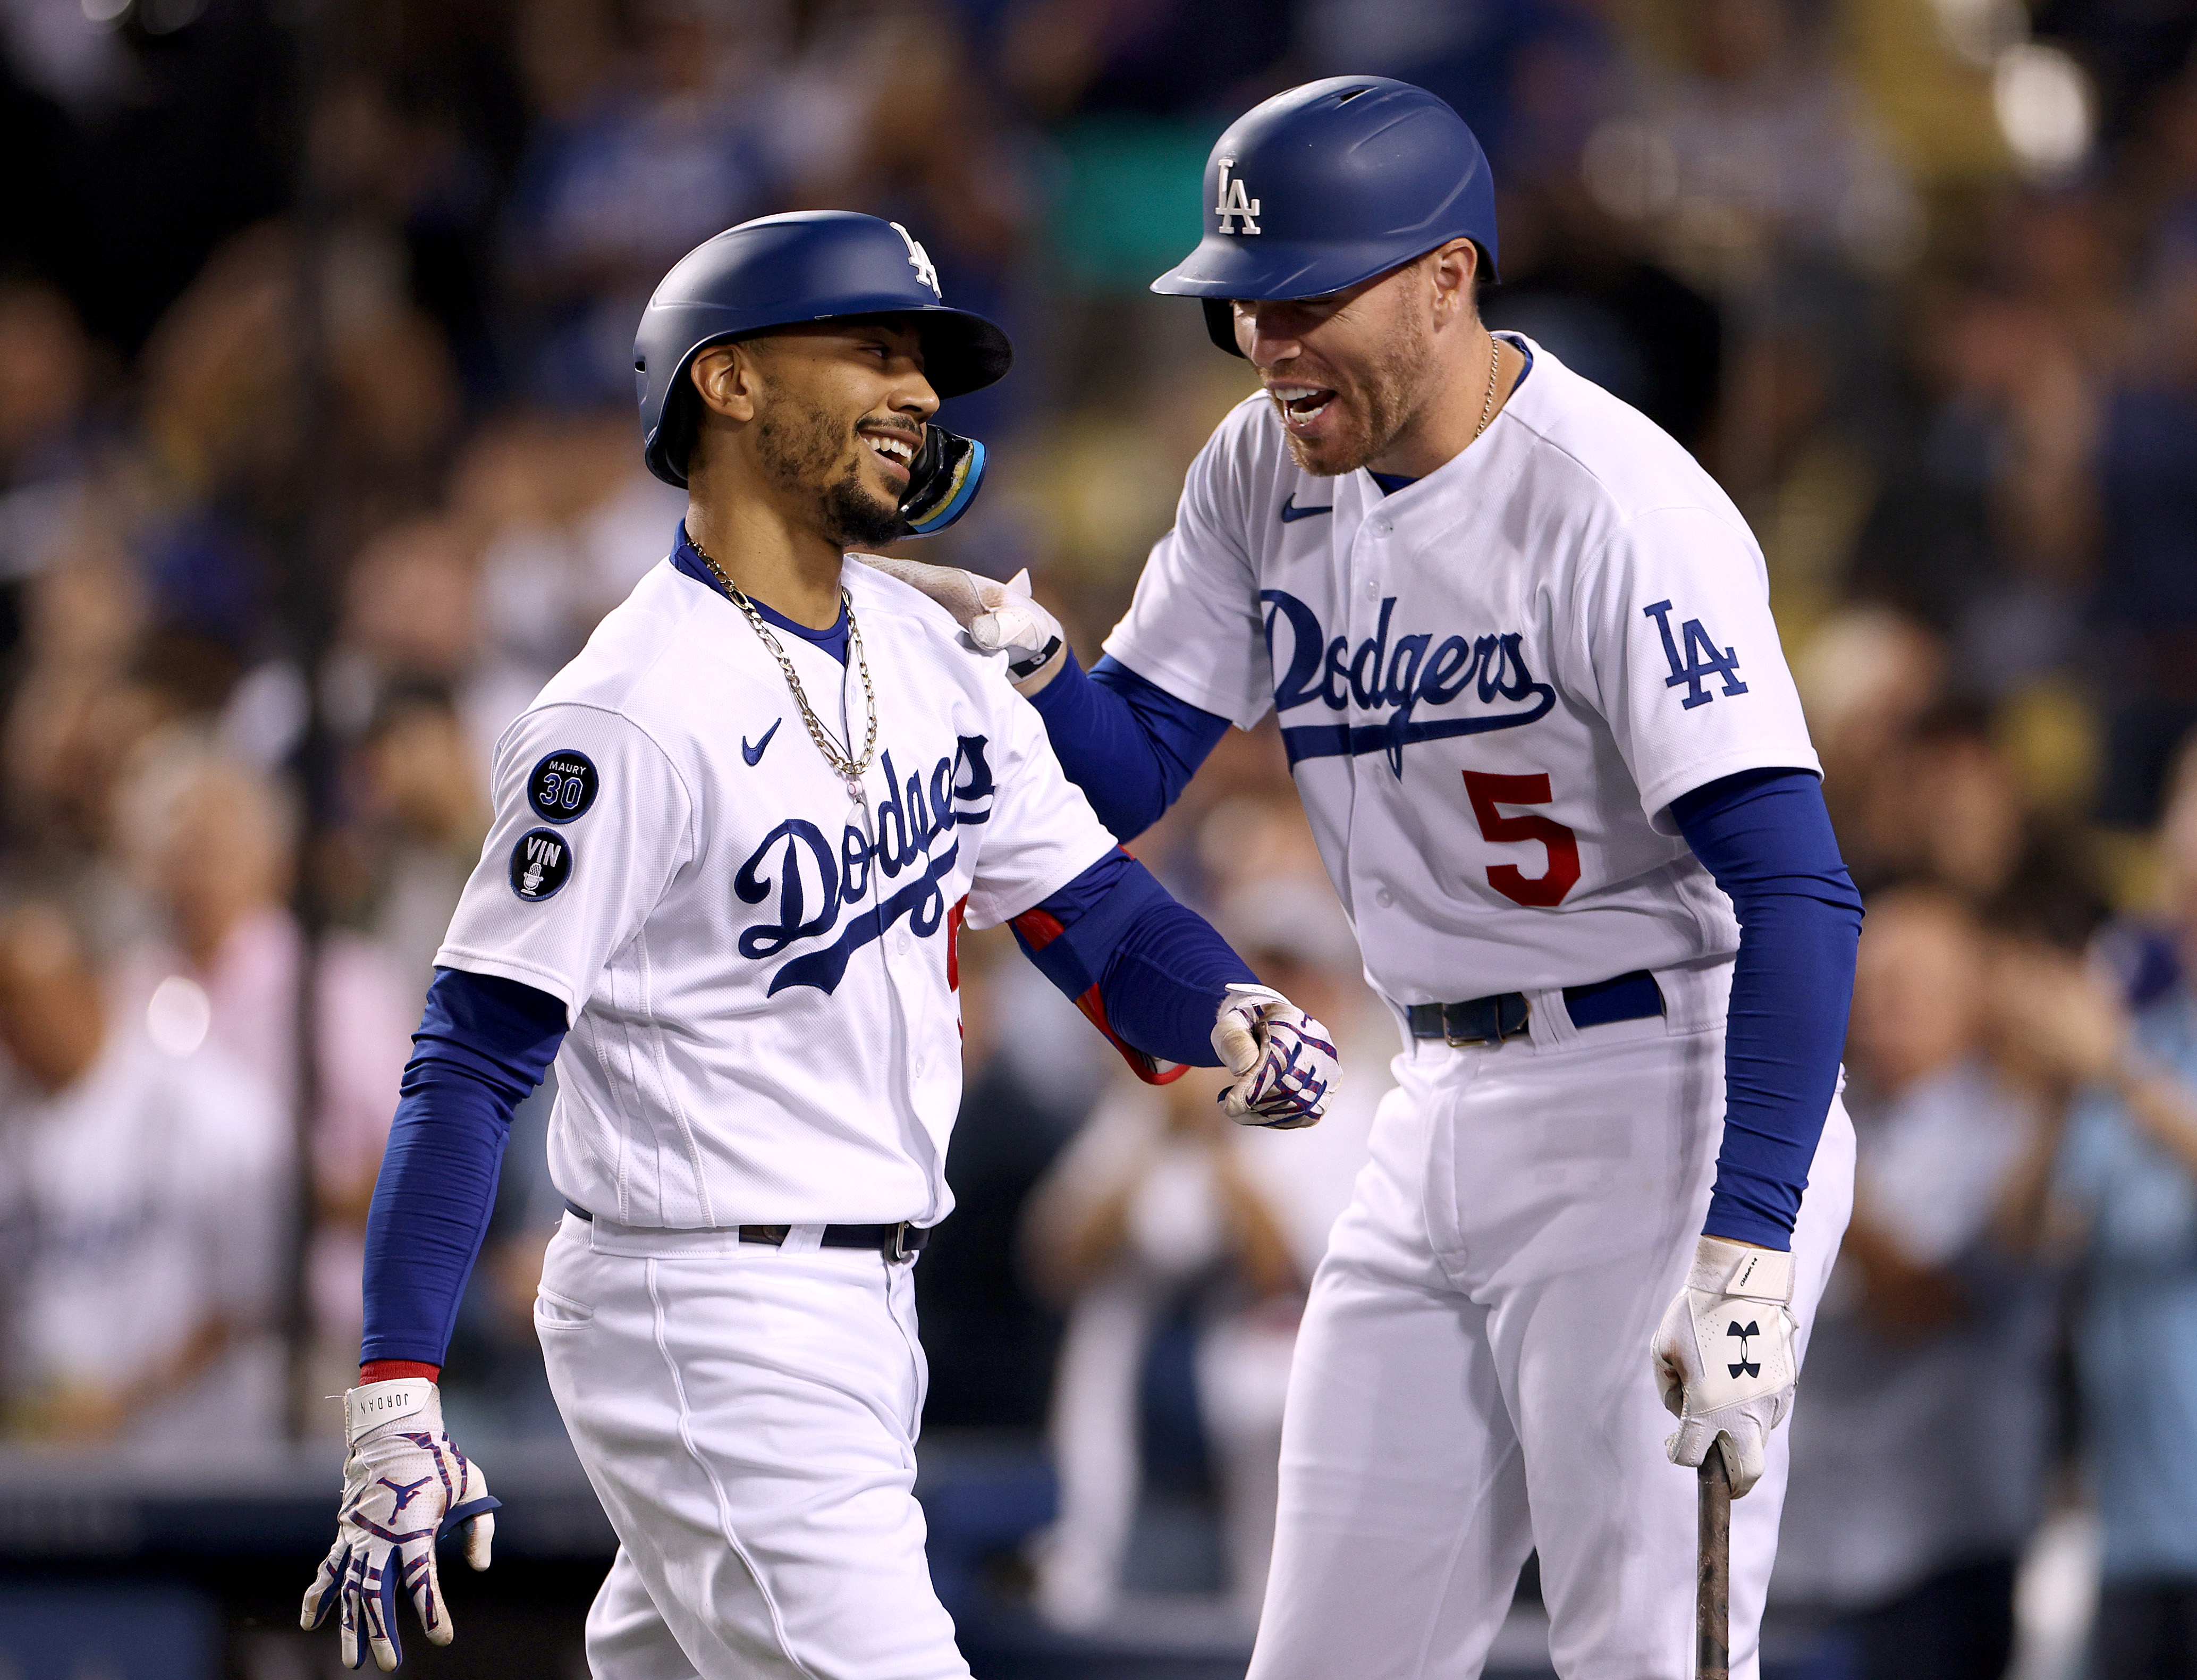 LOS ANGELES, CALIFORNIA - SEPTEMBER 21: Mookie Betts #50 of the Los Angeles Dodgers celebrates his solo homerun with Freddie Freeman #5, to trail the Arizona Diamondbacks 5-1, during the fourth inning at Dodger Stadium on September 21, 2022 in Los Angeles, California.